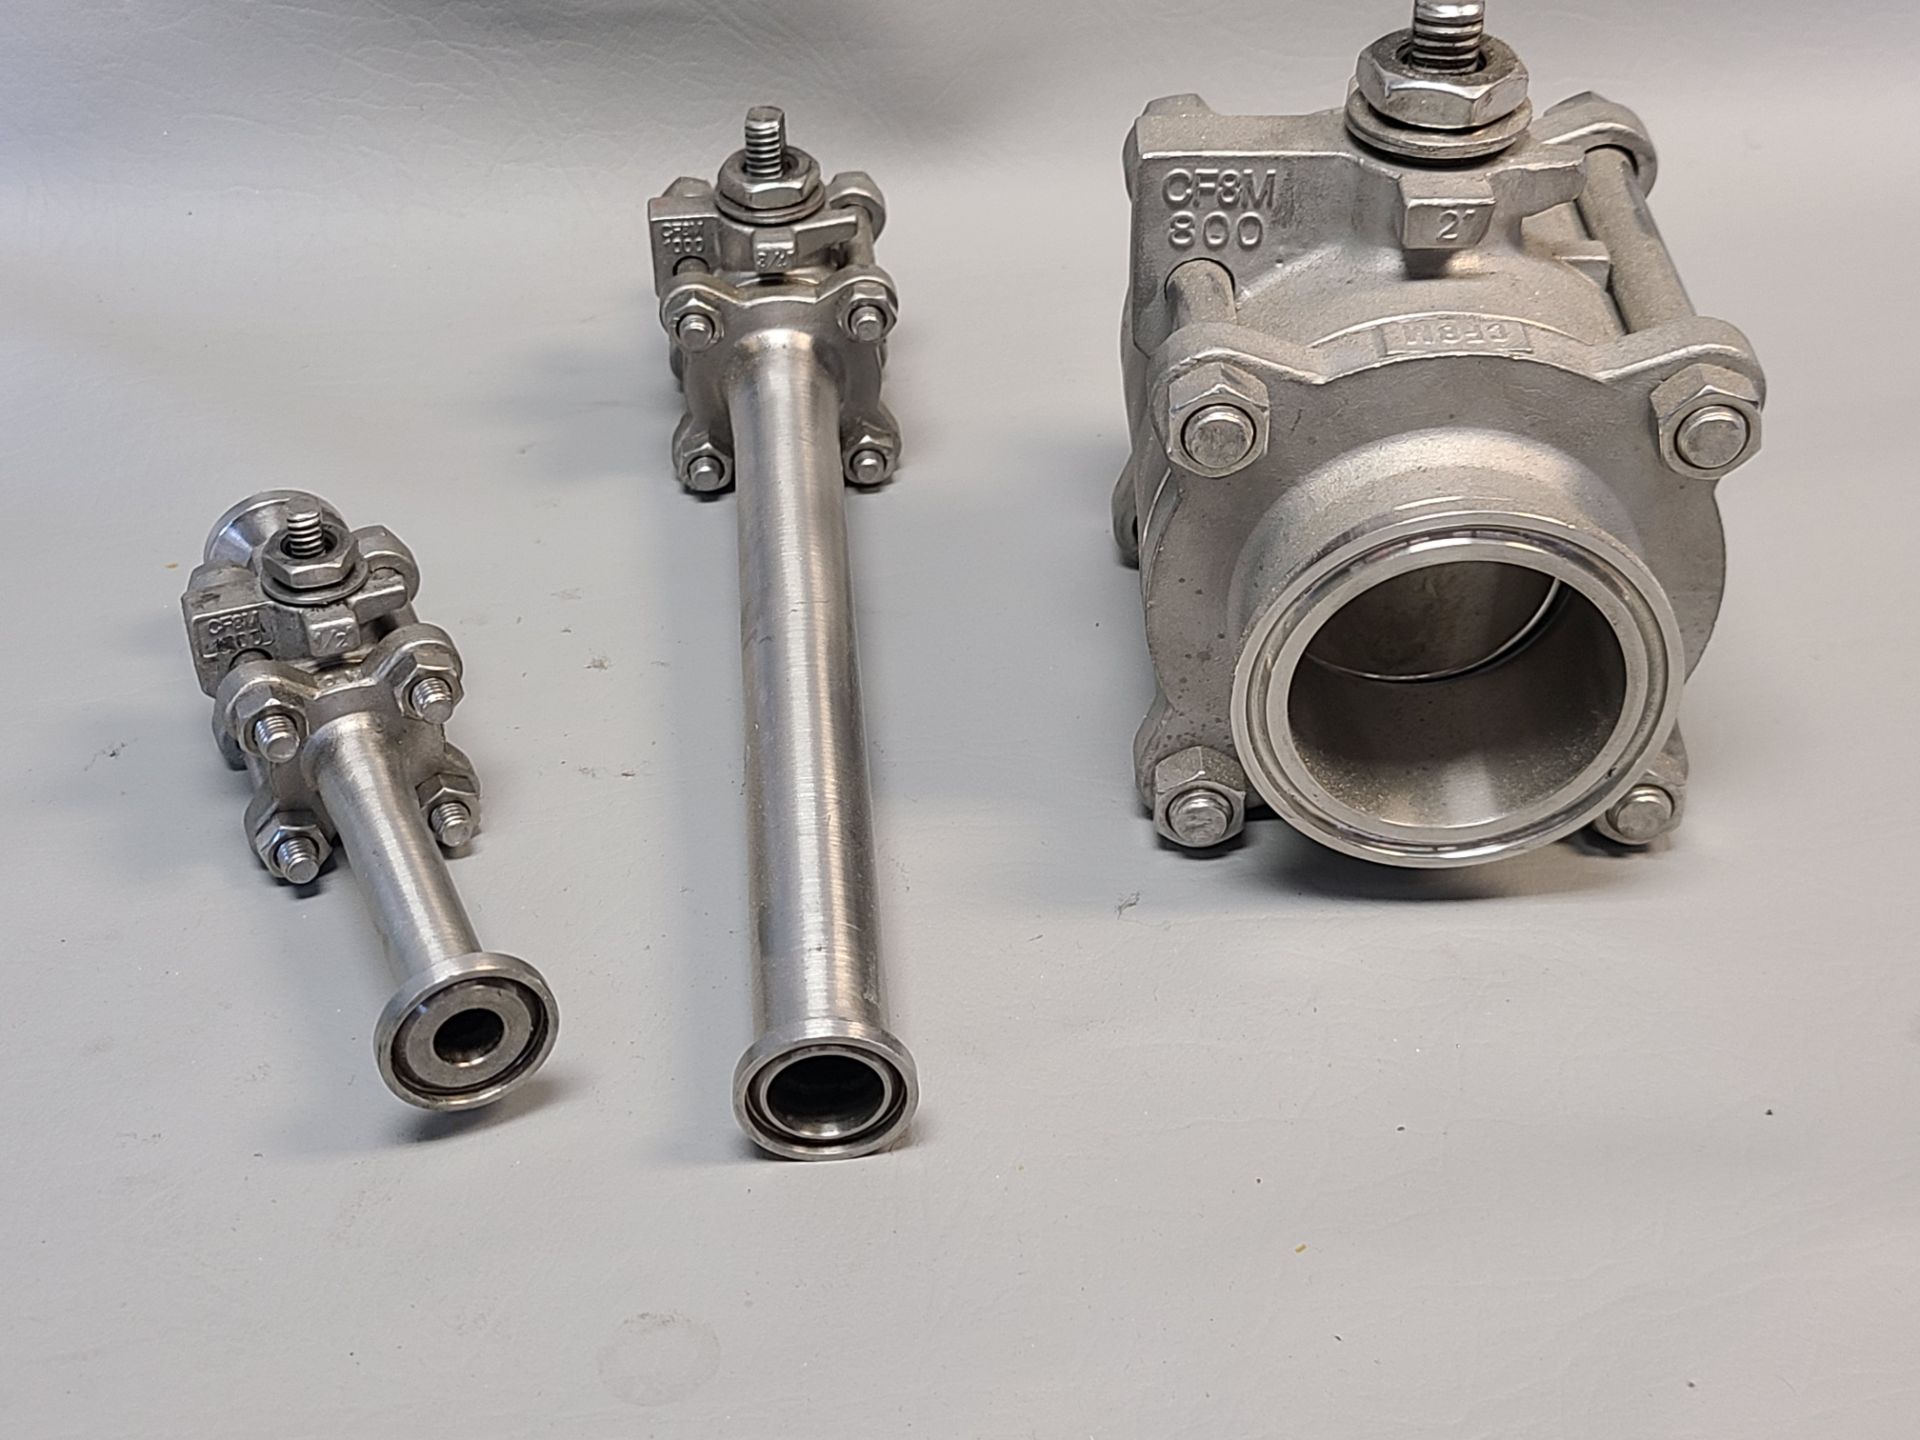 LOT OF 3 INLINE INDUSTRIES STAINLESS STEEL BALL VALVES - Image 5 of 9